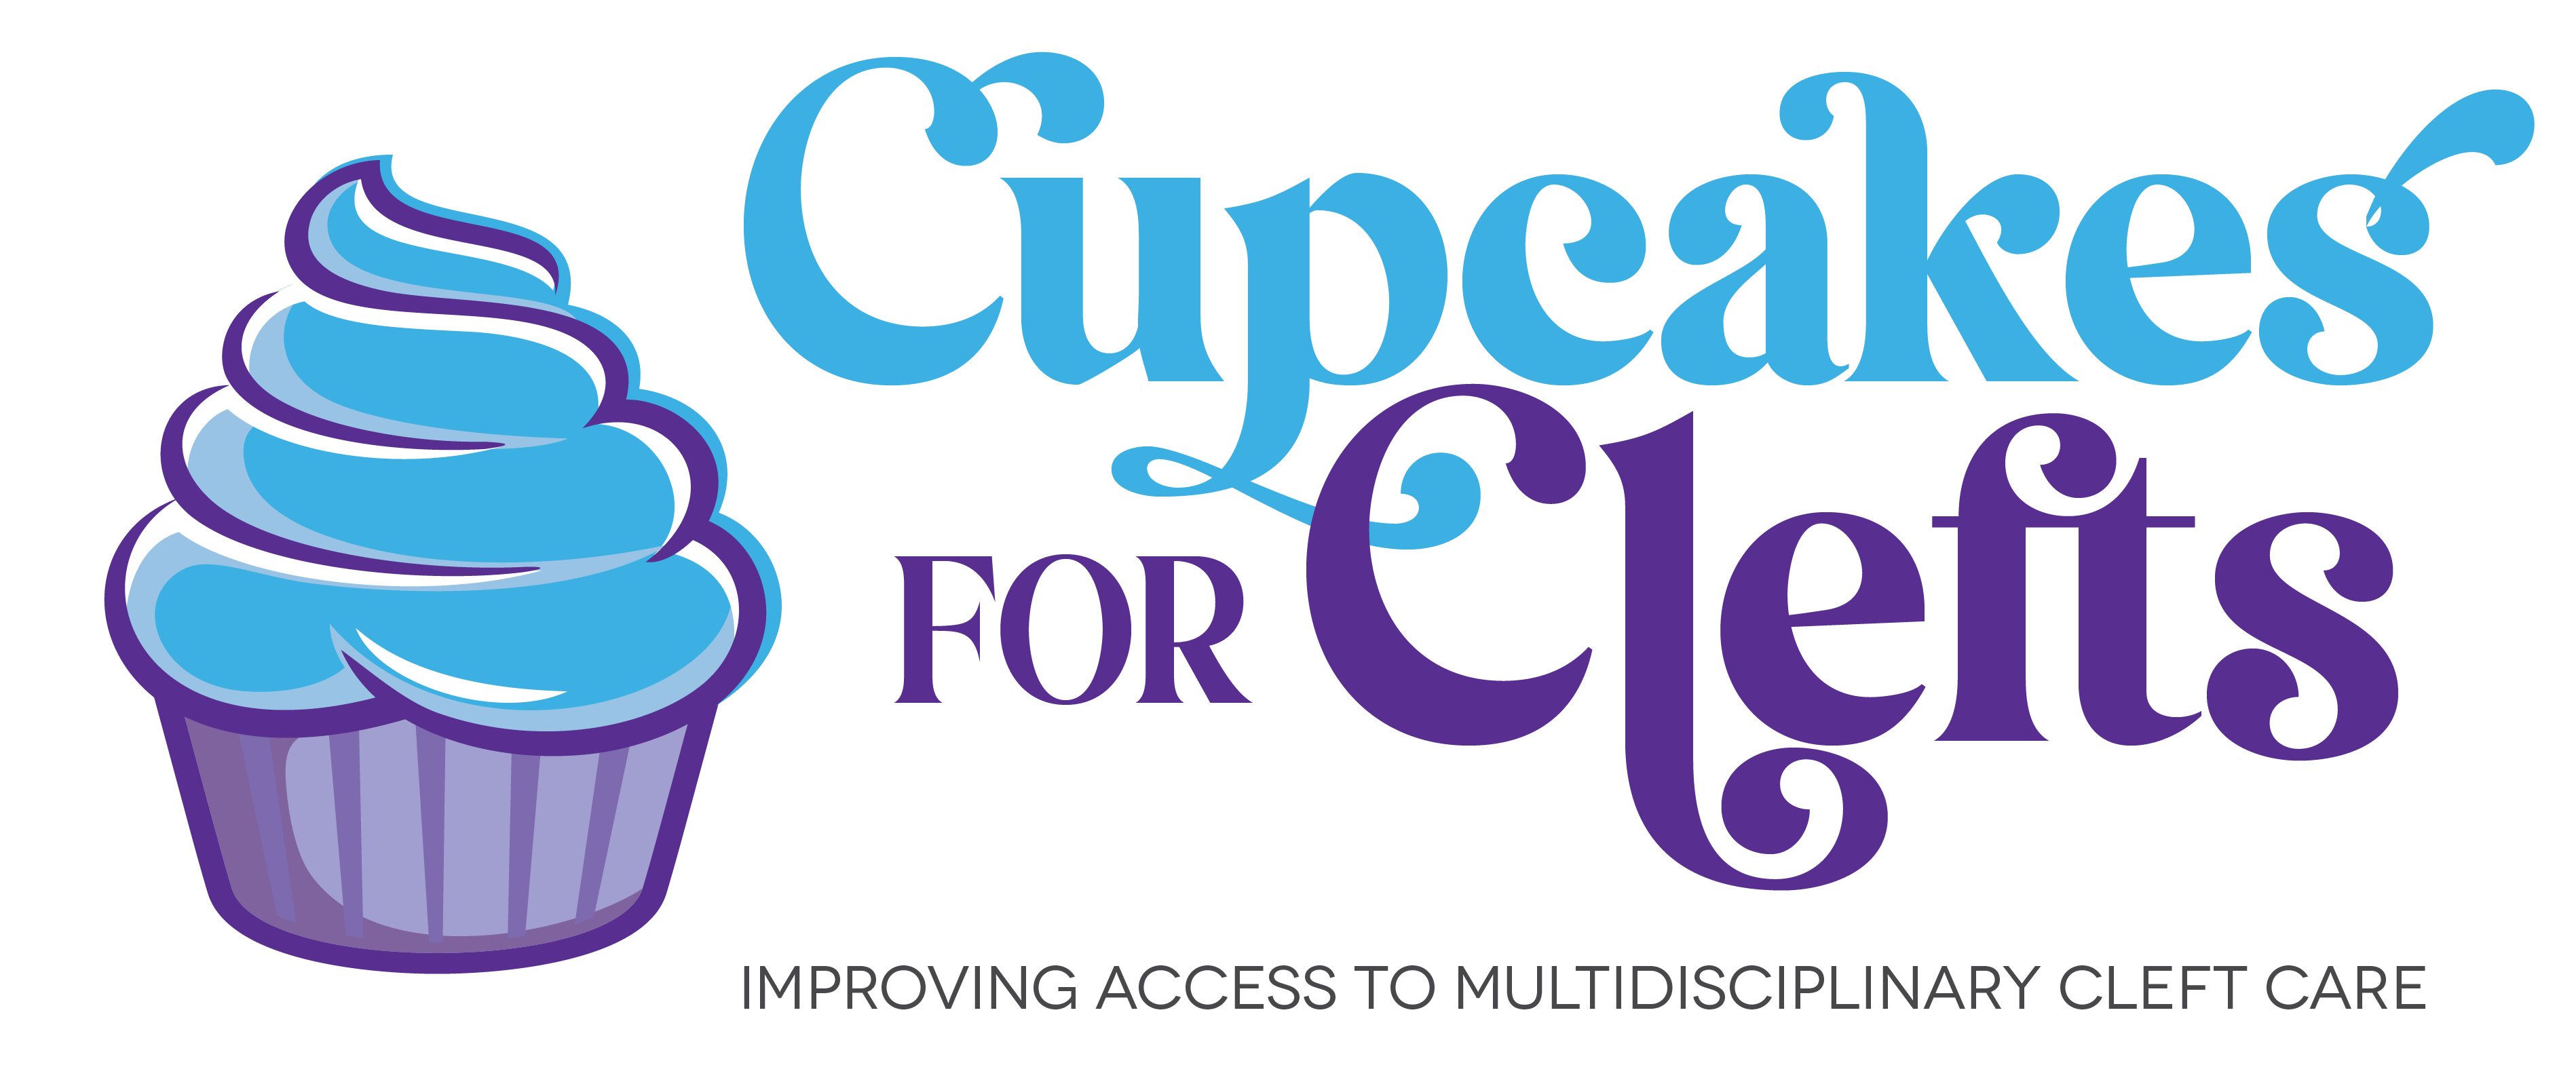 cupcakes for clefts logo